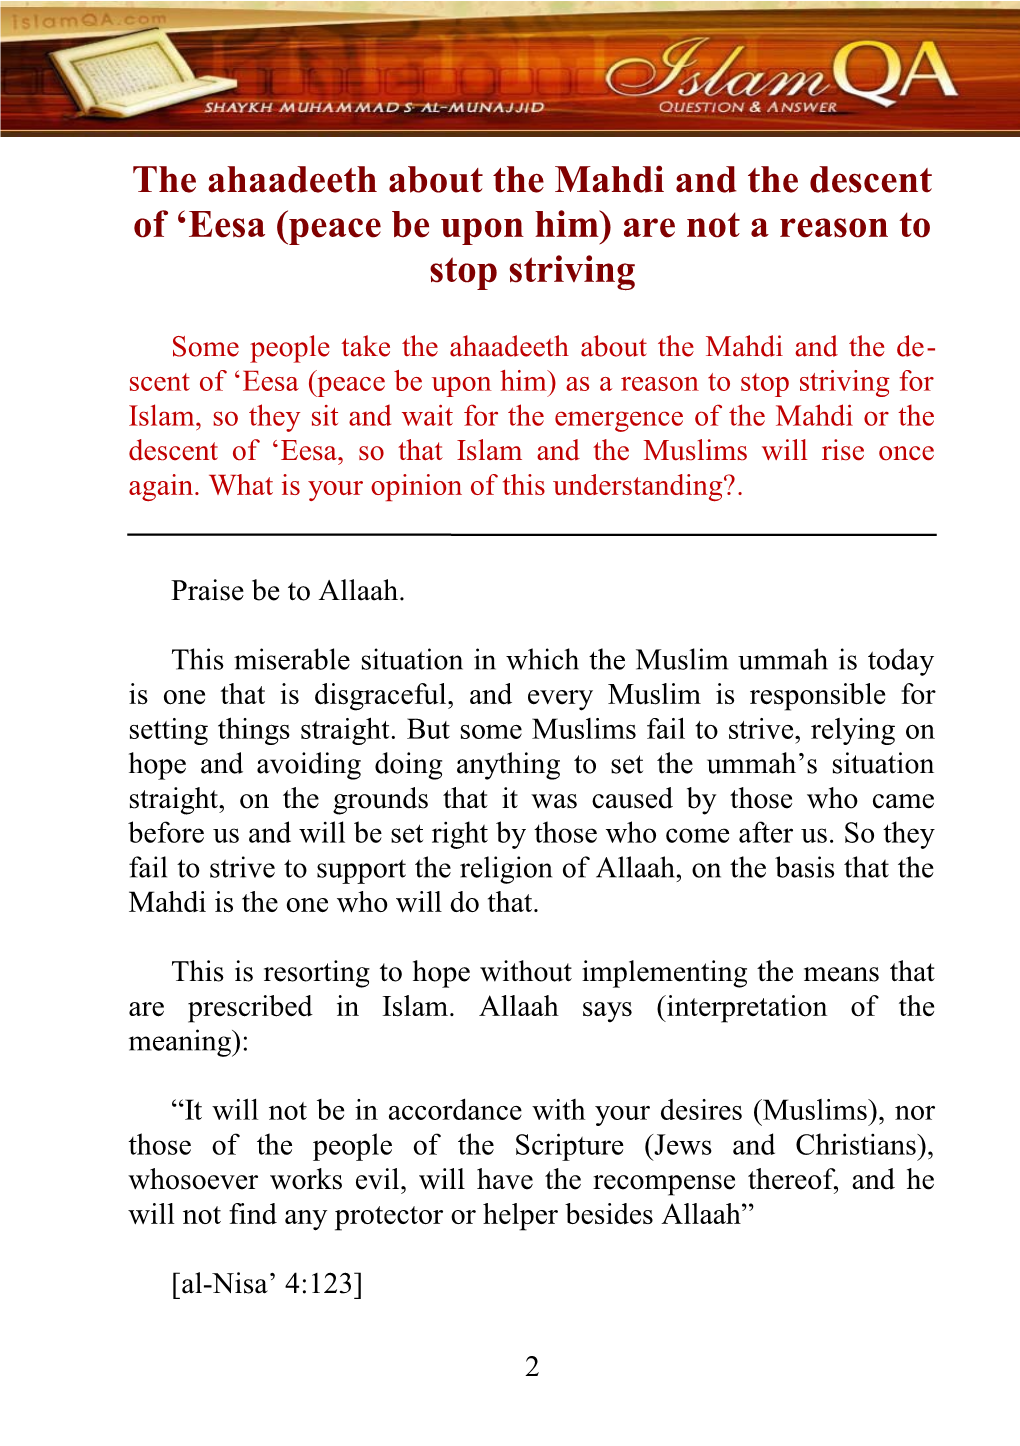 The Ahaadeeth About the Mahdi and the Descent of Eesa (Peace Be Upon Him) Are Not a Reason